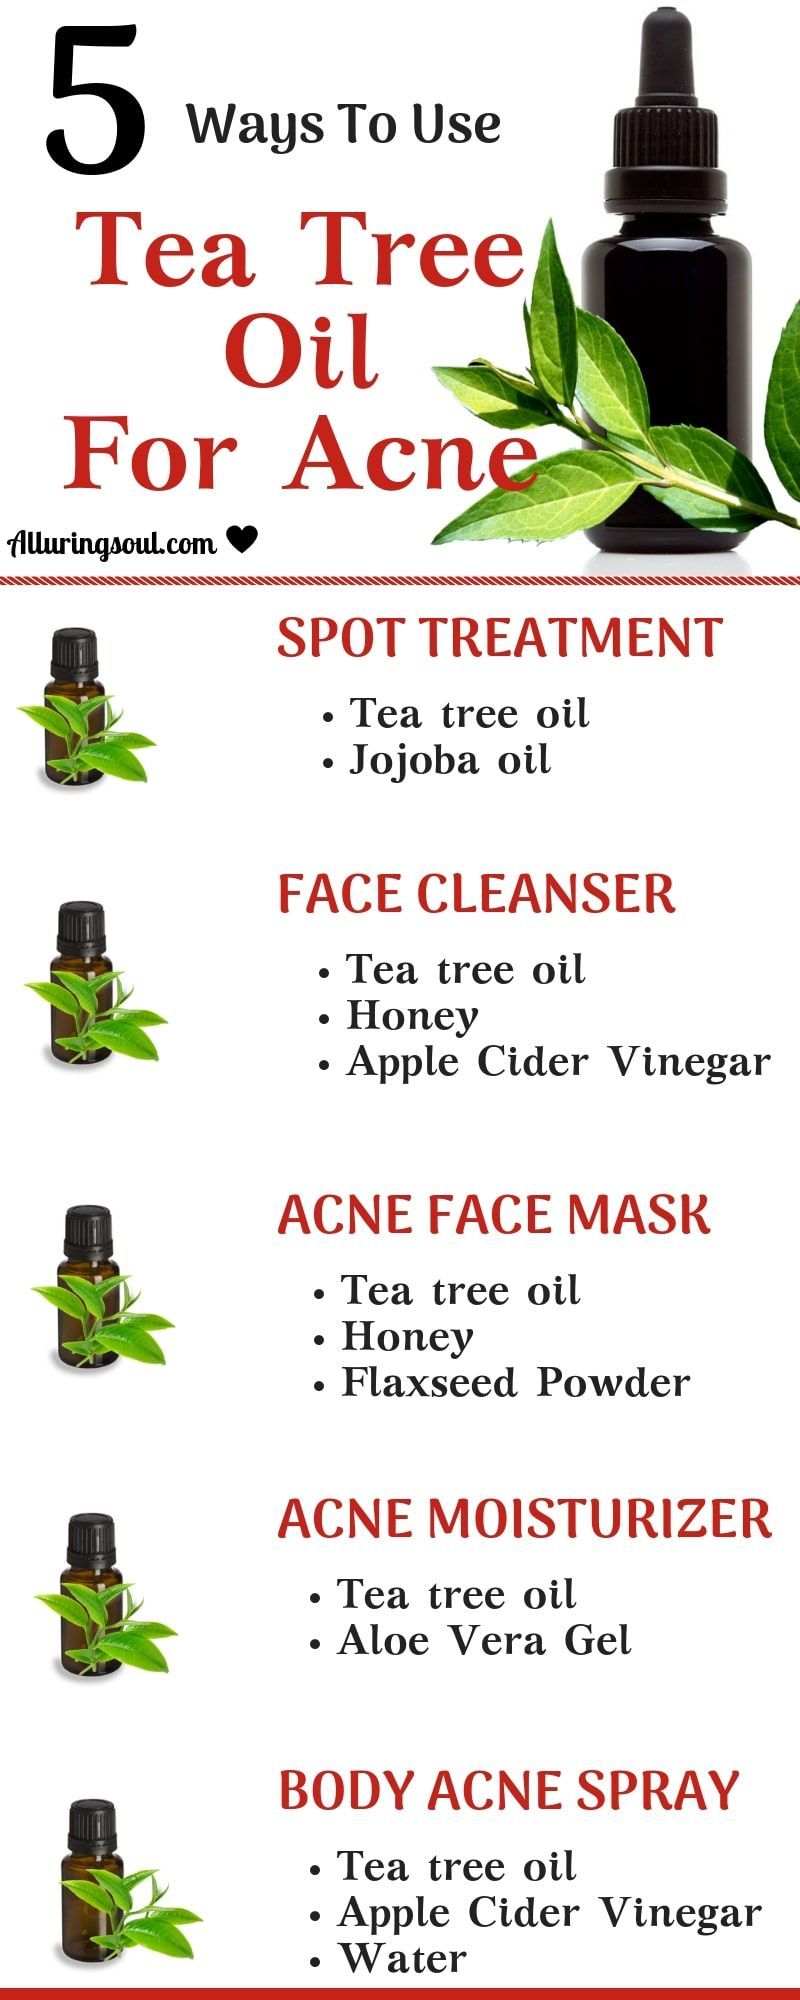 How To Use Tea Tree Oil For Acne - 5 Proven Remedies -   13 skin care Acne tea tree ideas